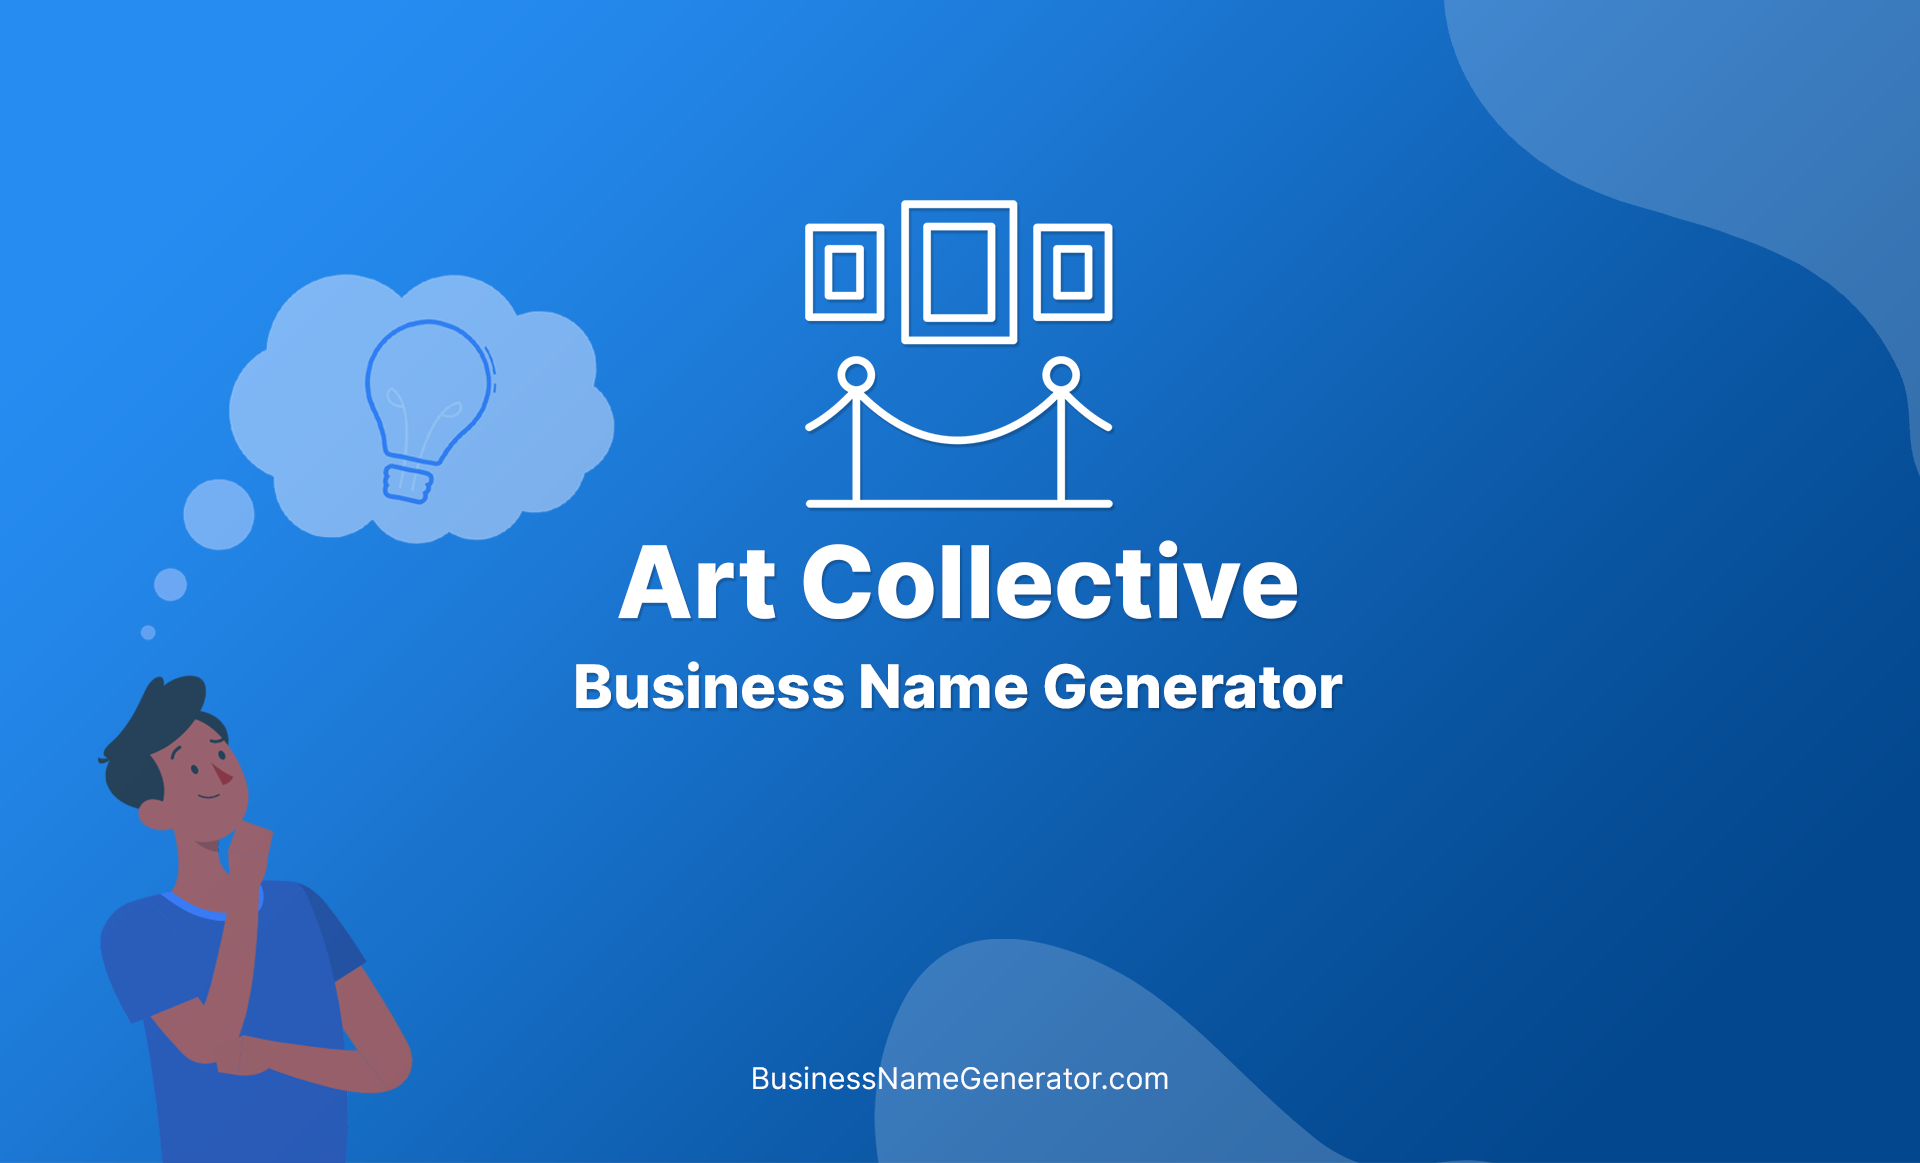 Art Collective Business Name Generator